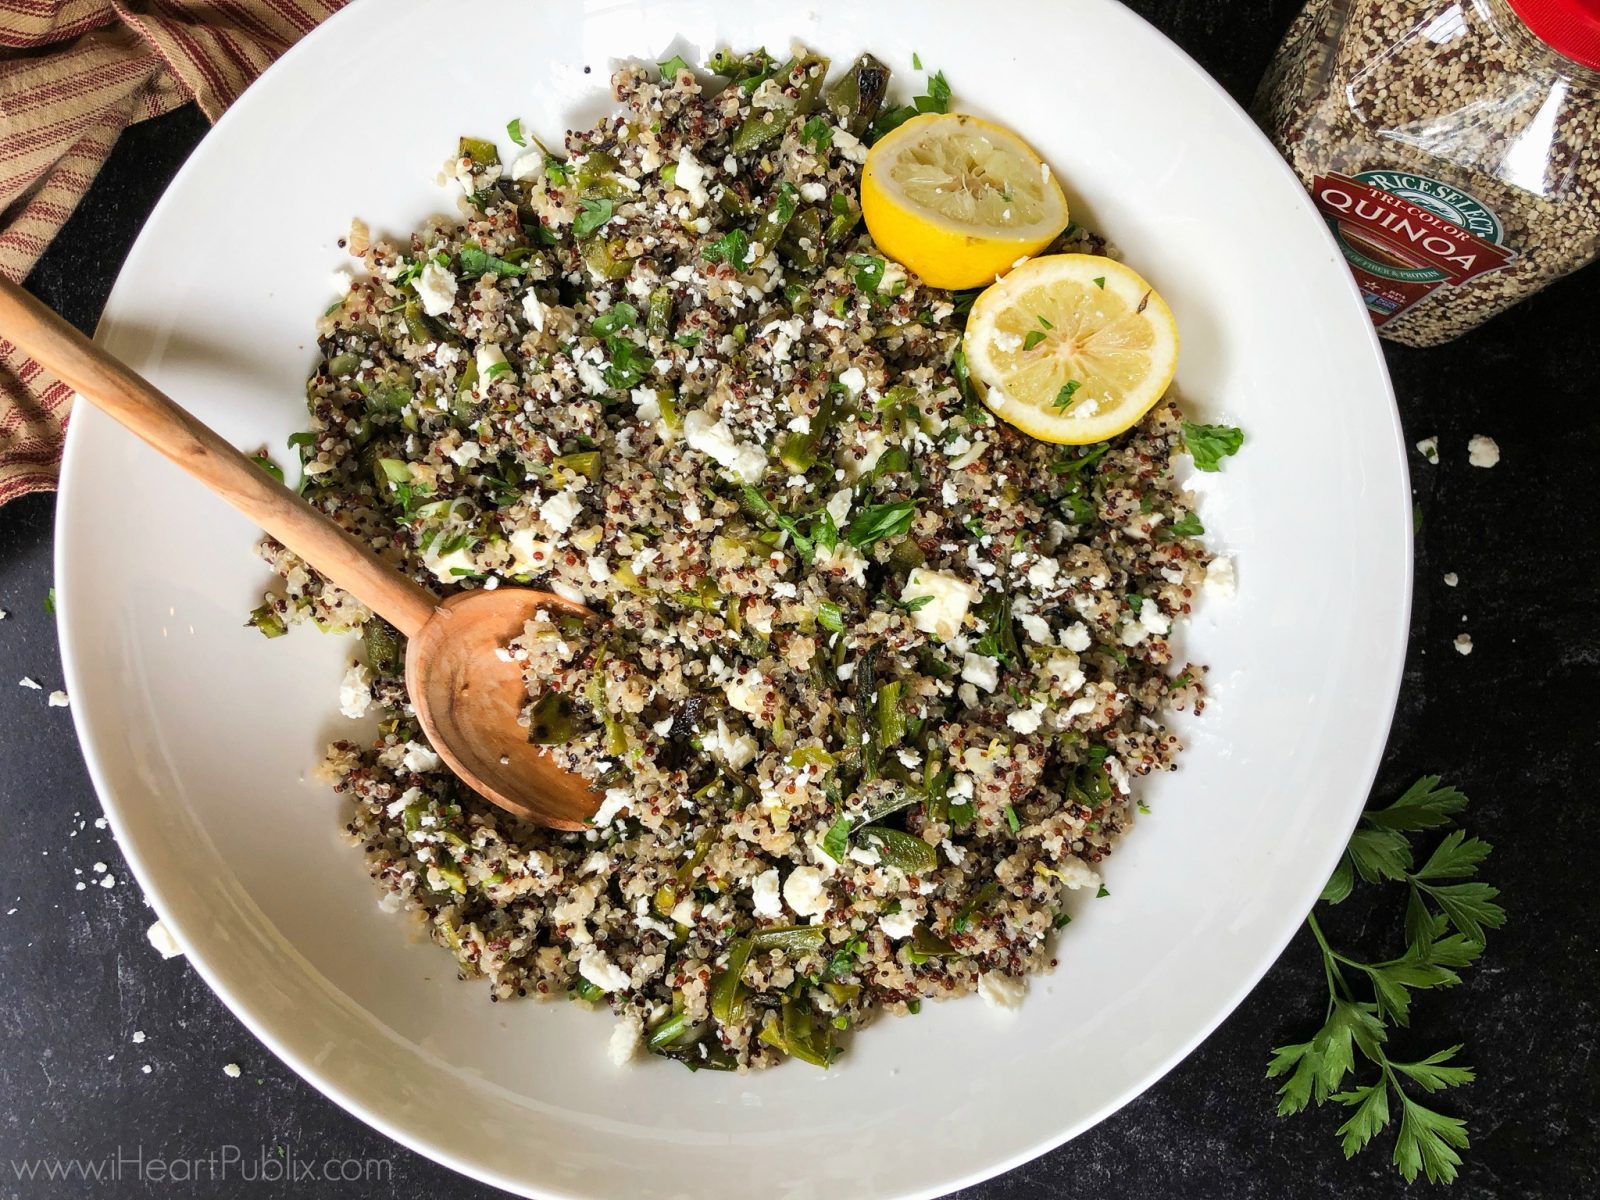 Tri-Color Quinoa with Grilled Vegetables and Feta – Get Savings On RiceSelect Quinoa At Publix